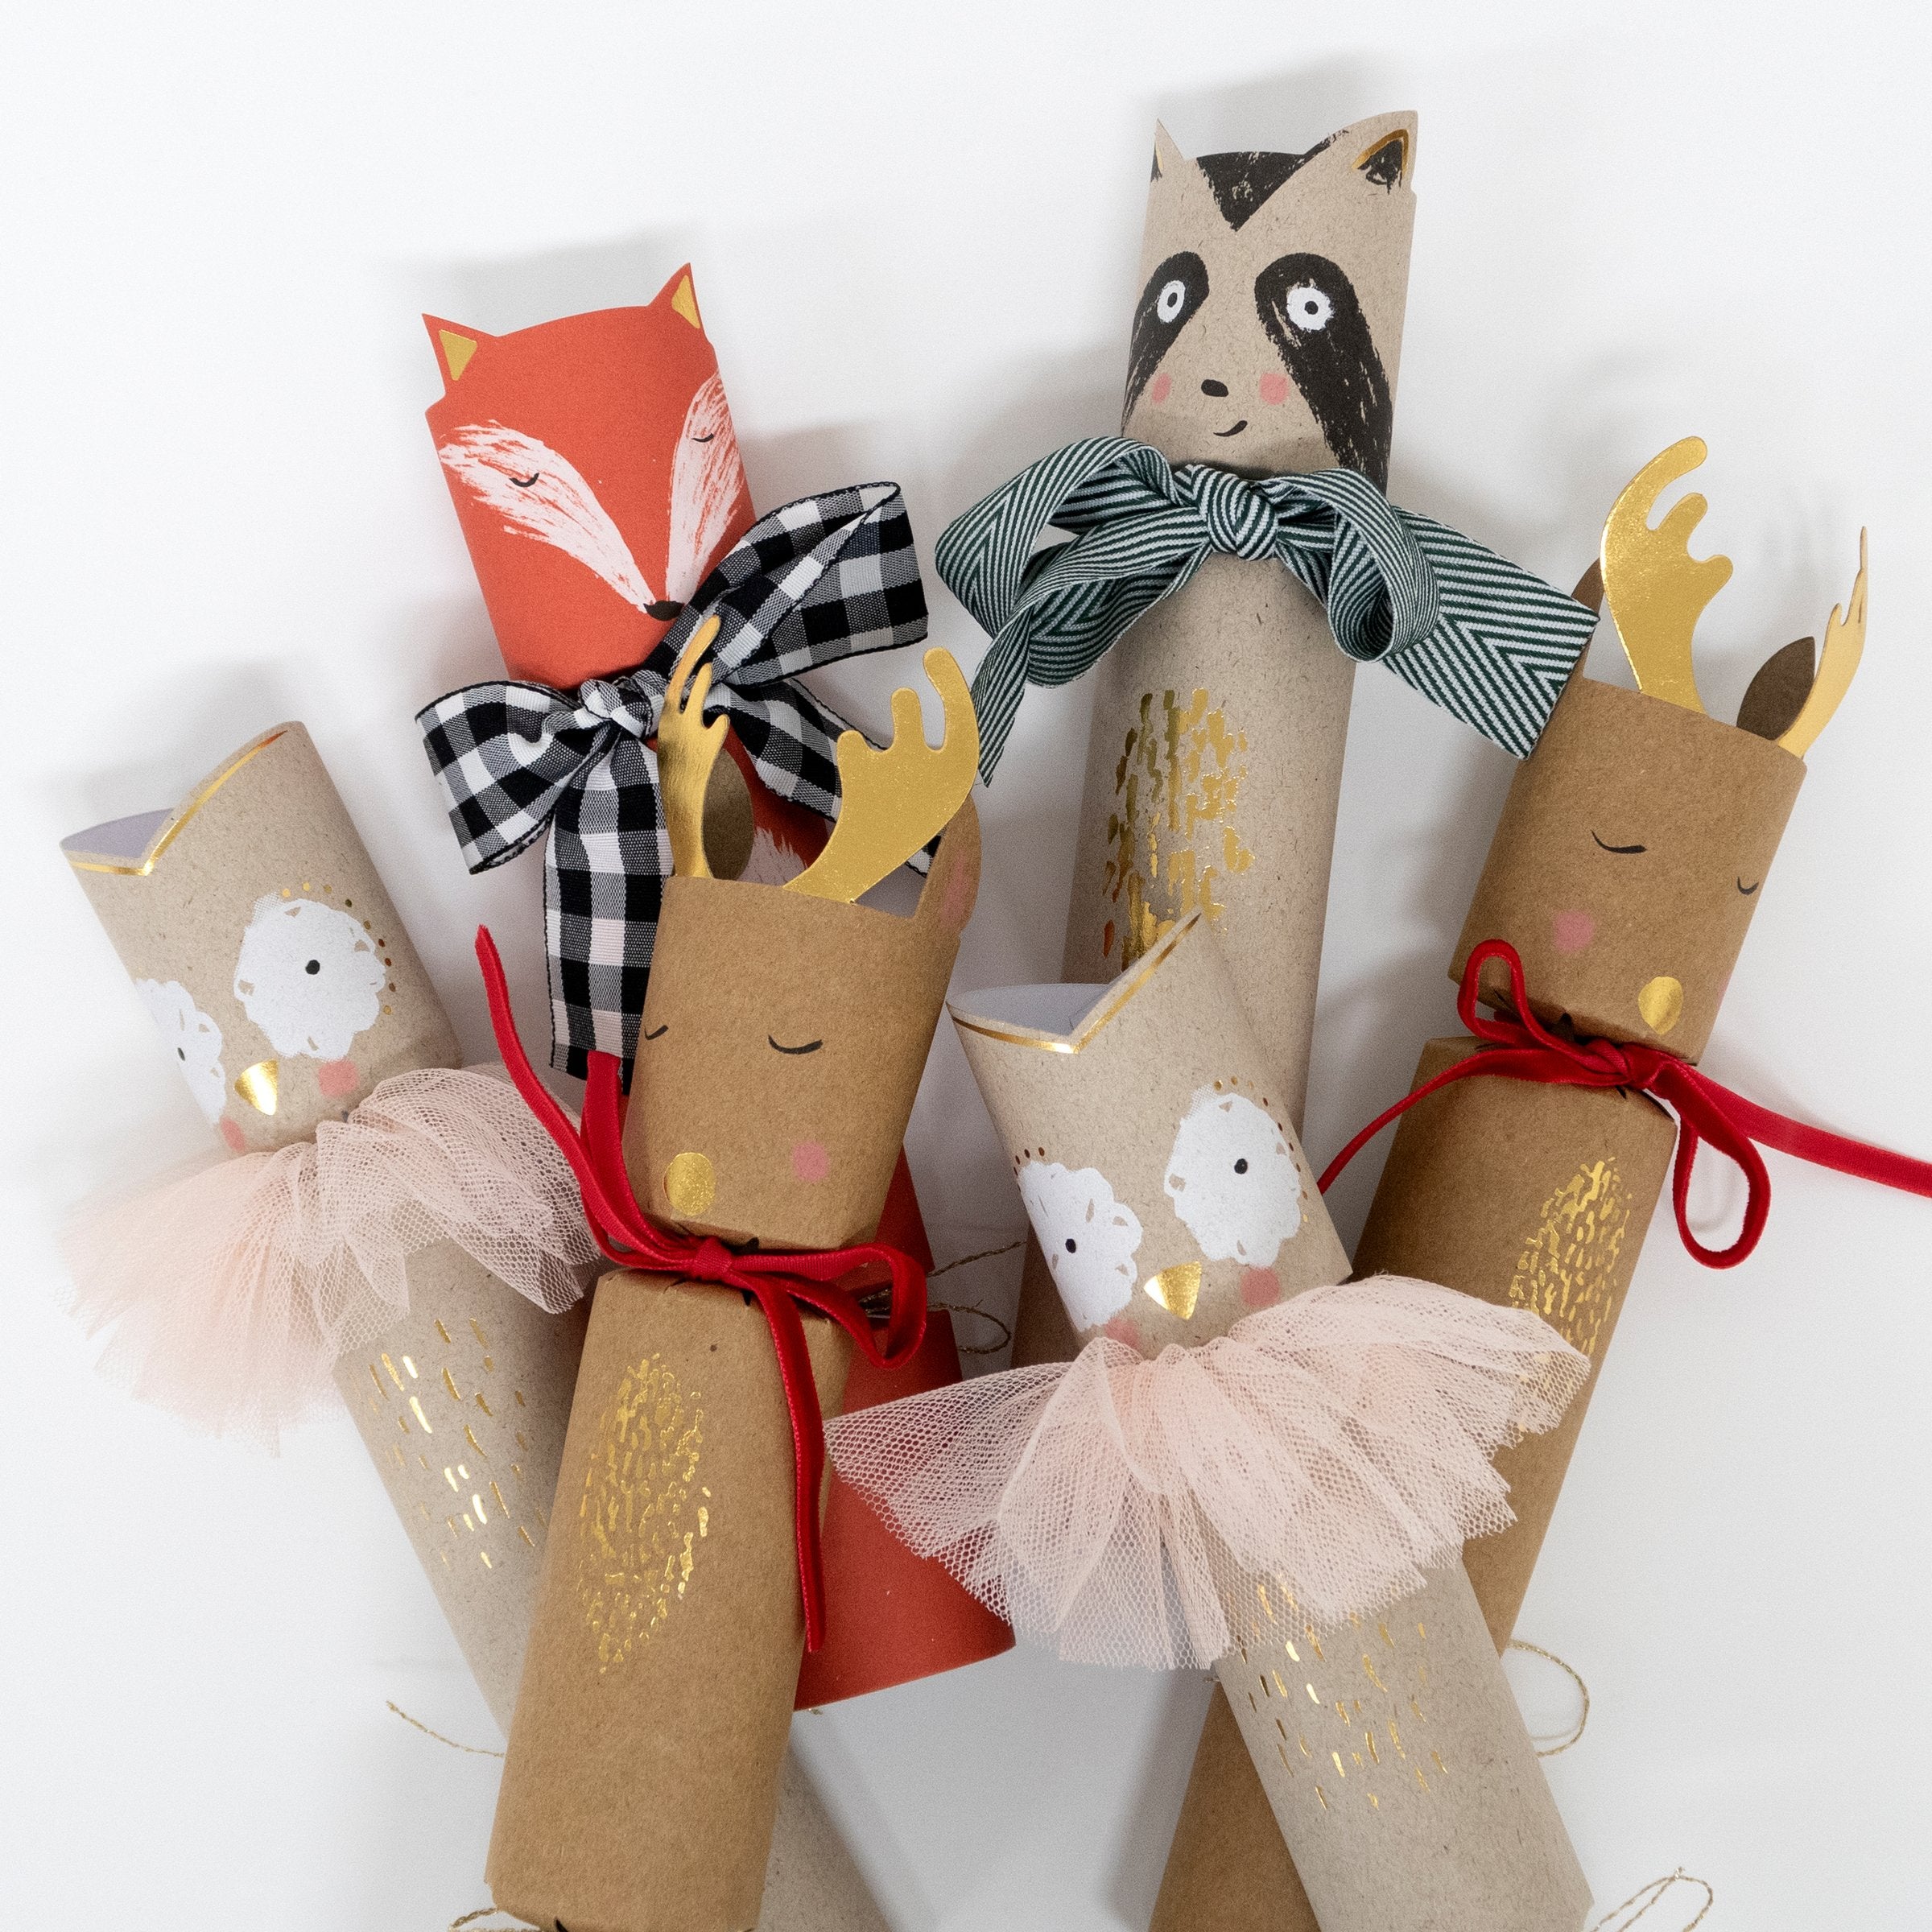 Our woodland animal crackers, with wooden animal gifts, a joke, and a party hat inside ,are really special.